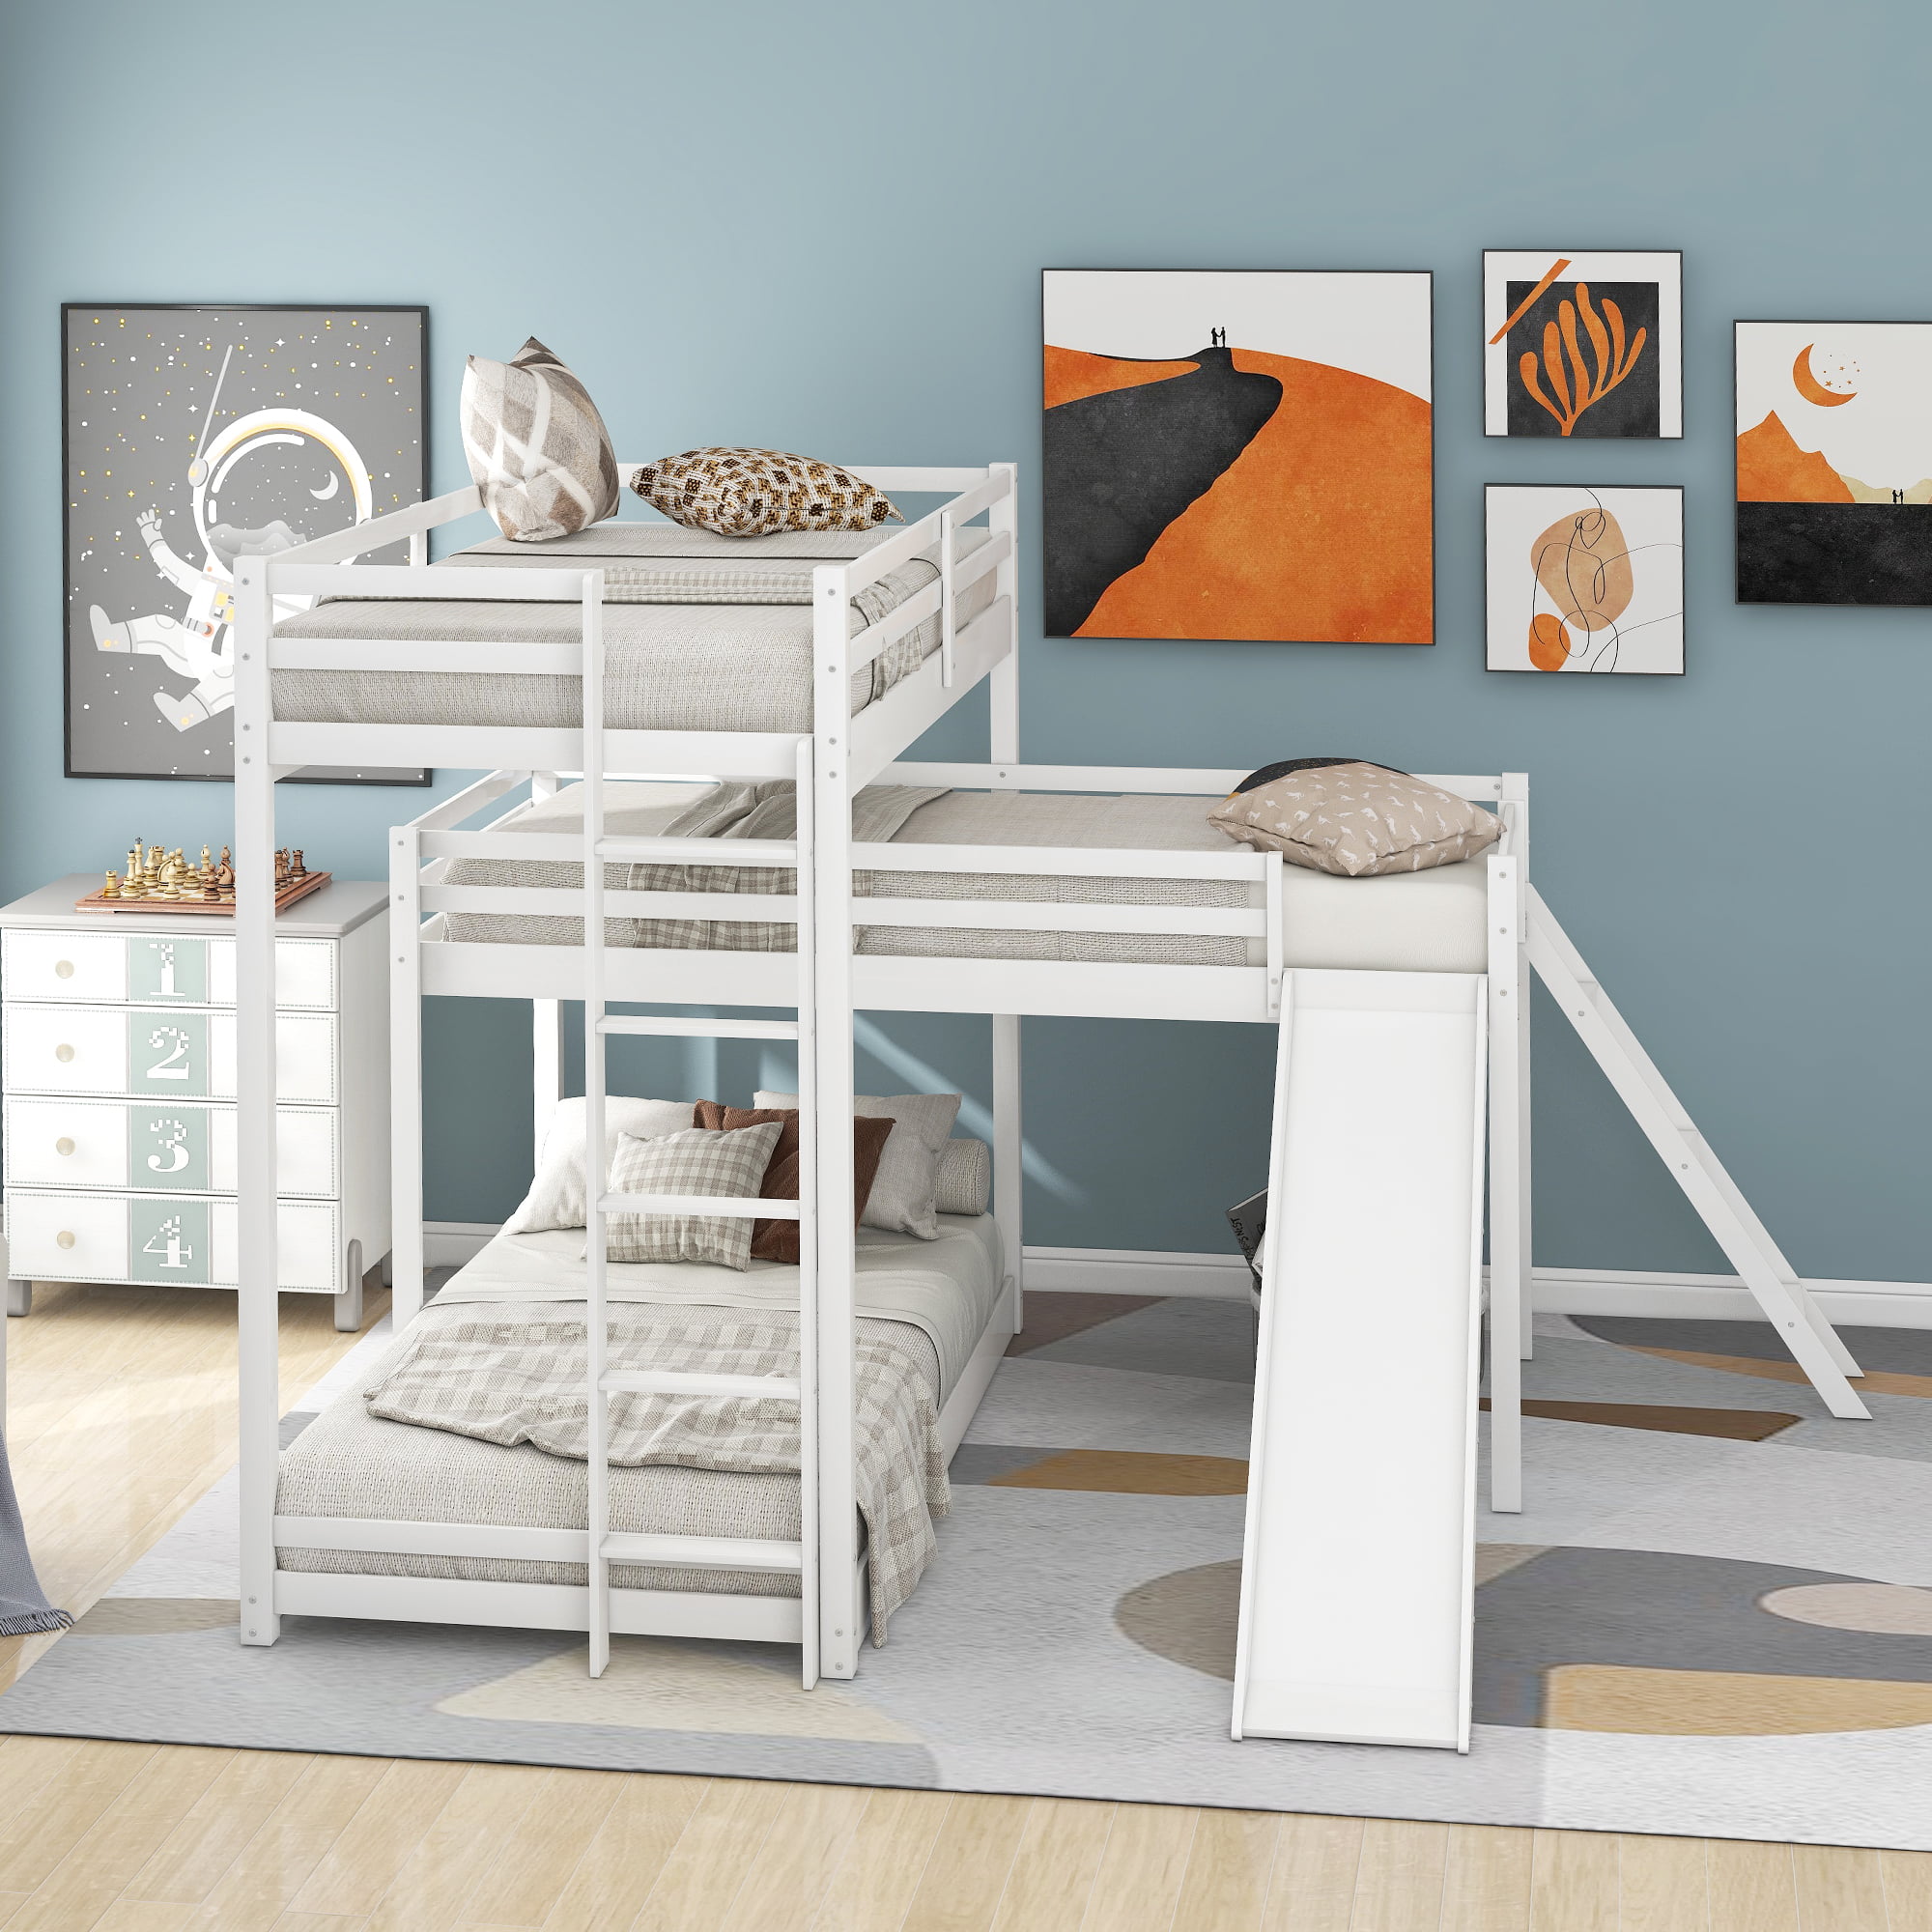 L Shaped Wood Triple Bunk Bed Frame, Space Saver Twin Bunk Bed